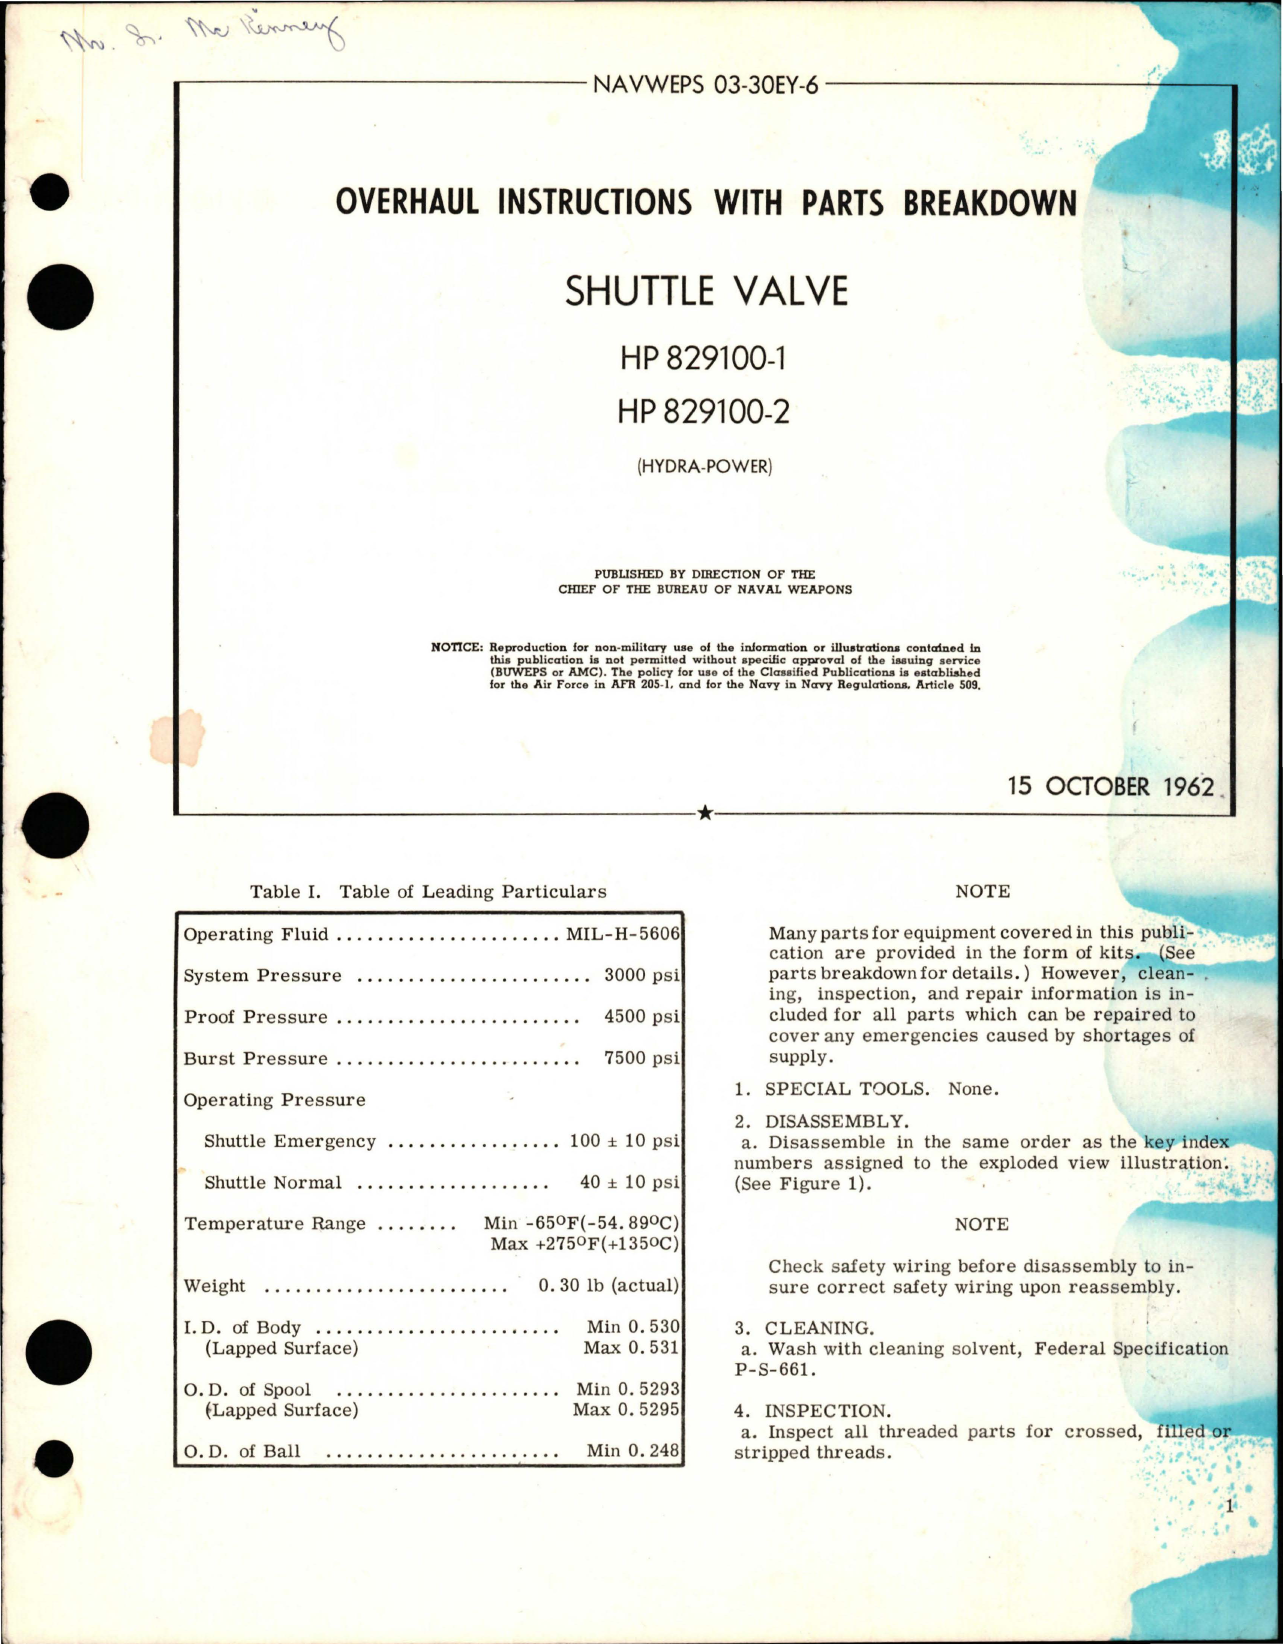 Sample page 1 from AirCorps Library document: Overhaul Instructions with Parts for Shuttle Valve - HP 829100-1 and HP 829100-2